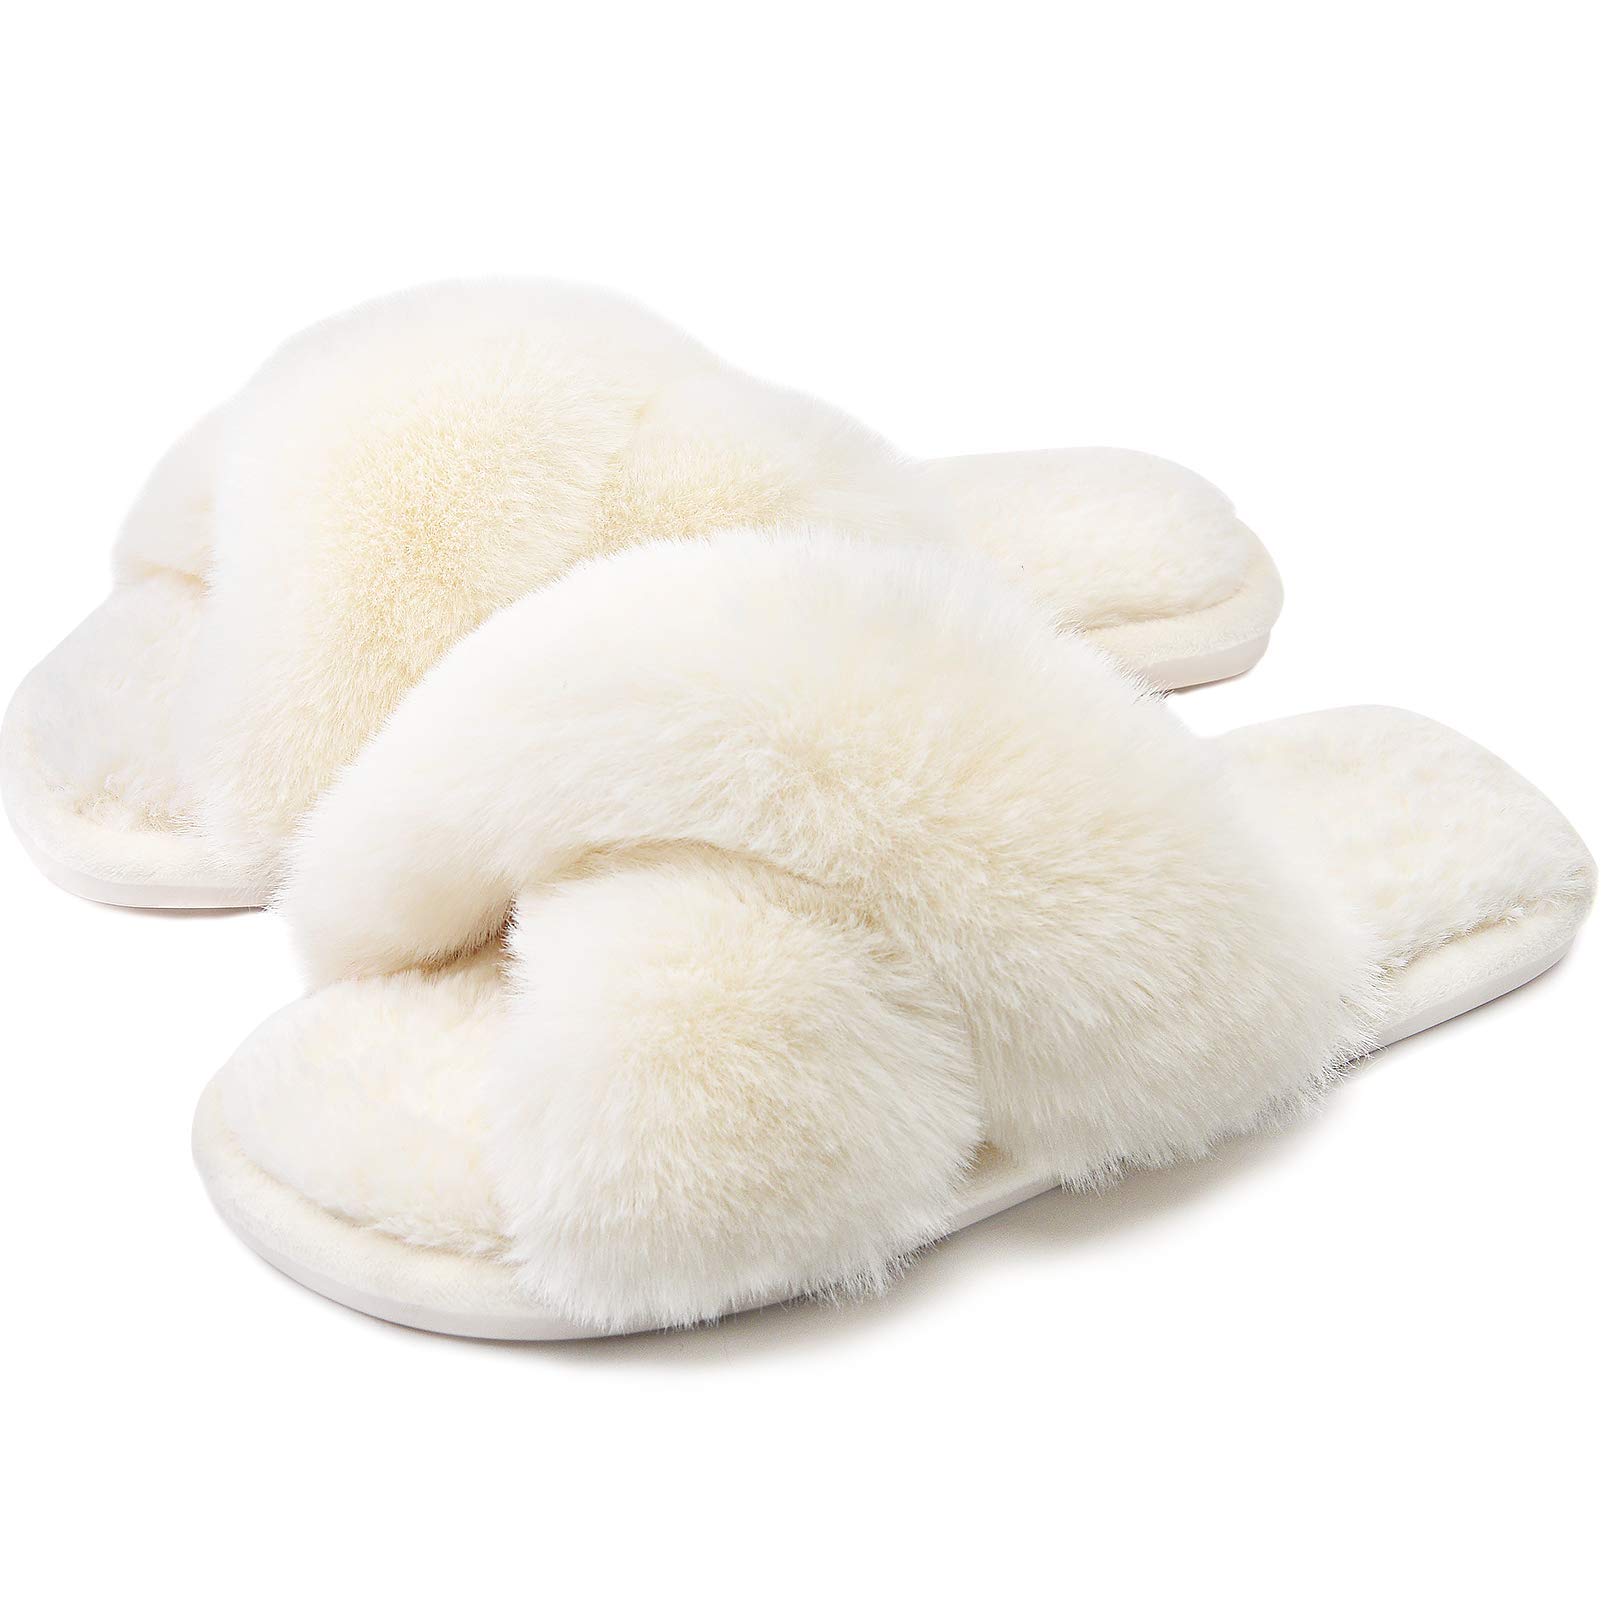 Womens Cross Band Slippers Cozy Furry Fuzzy House Slippers Open Toe Fluffy Indoor Shoes Outdoor Slip on Warm Breathable Anti-skid Sole